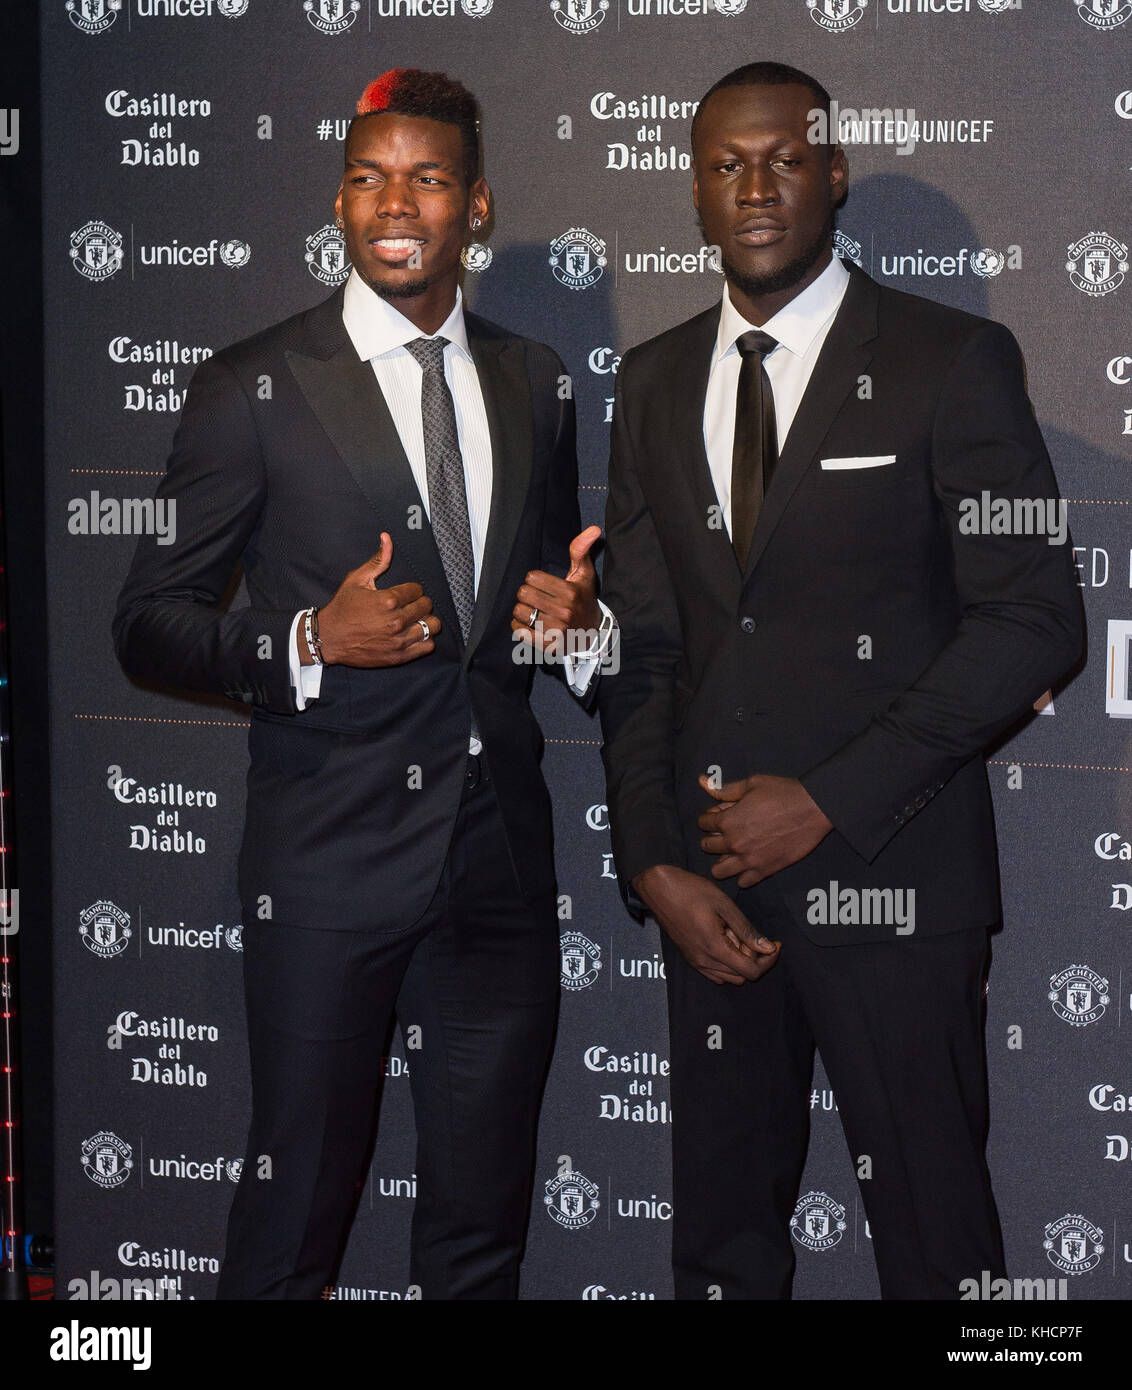 pogba and stormzy